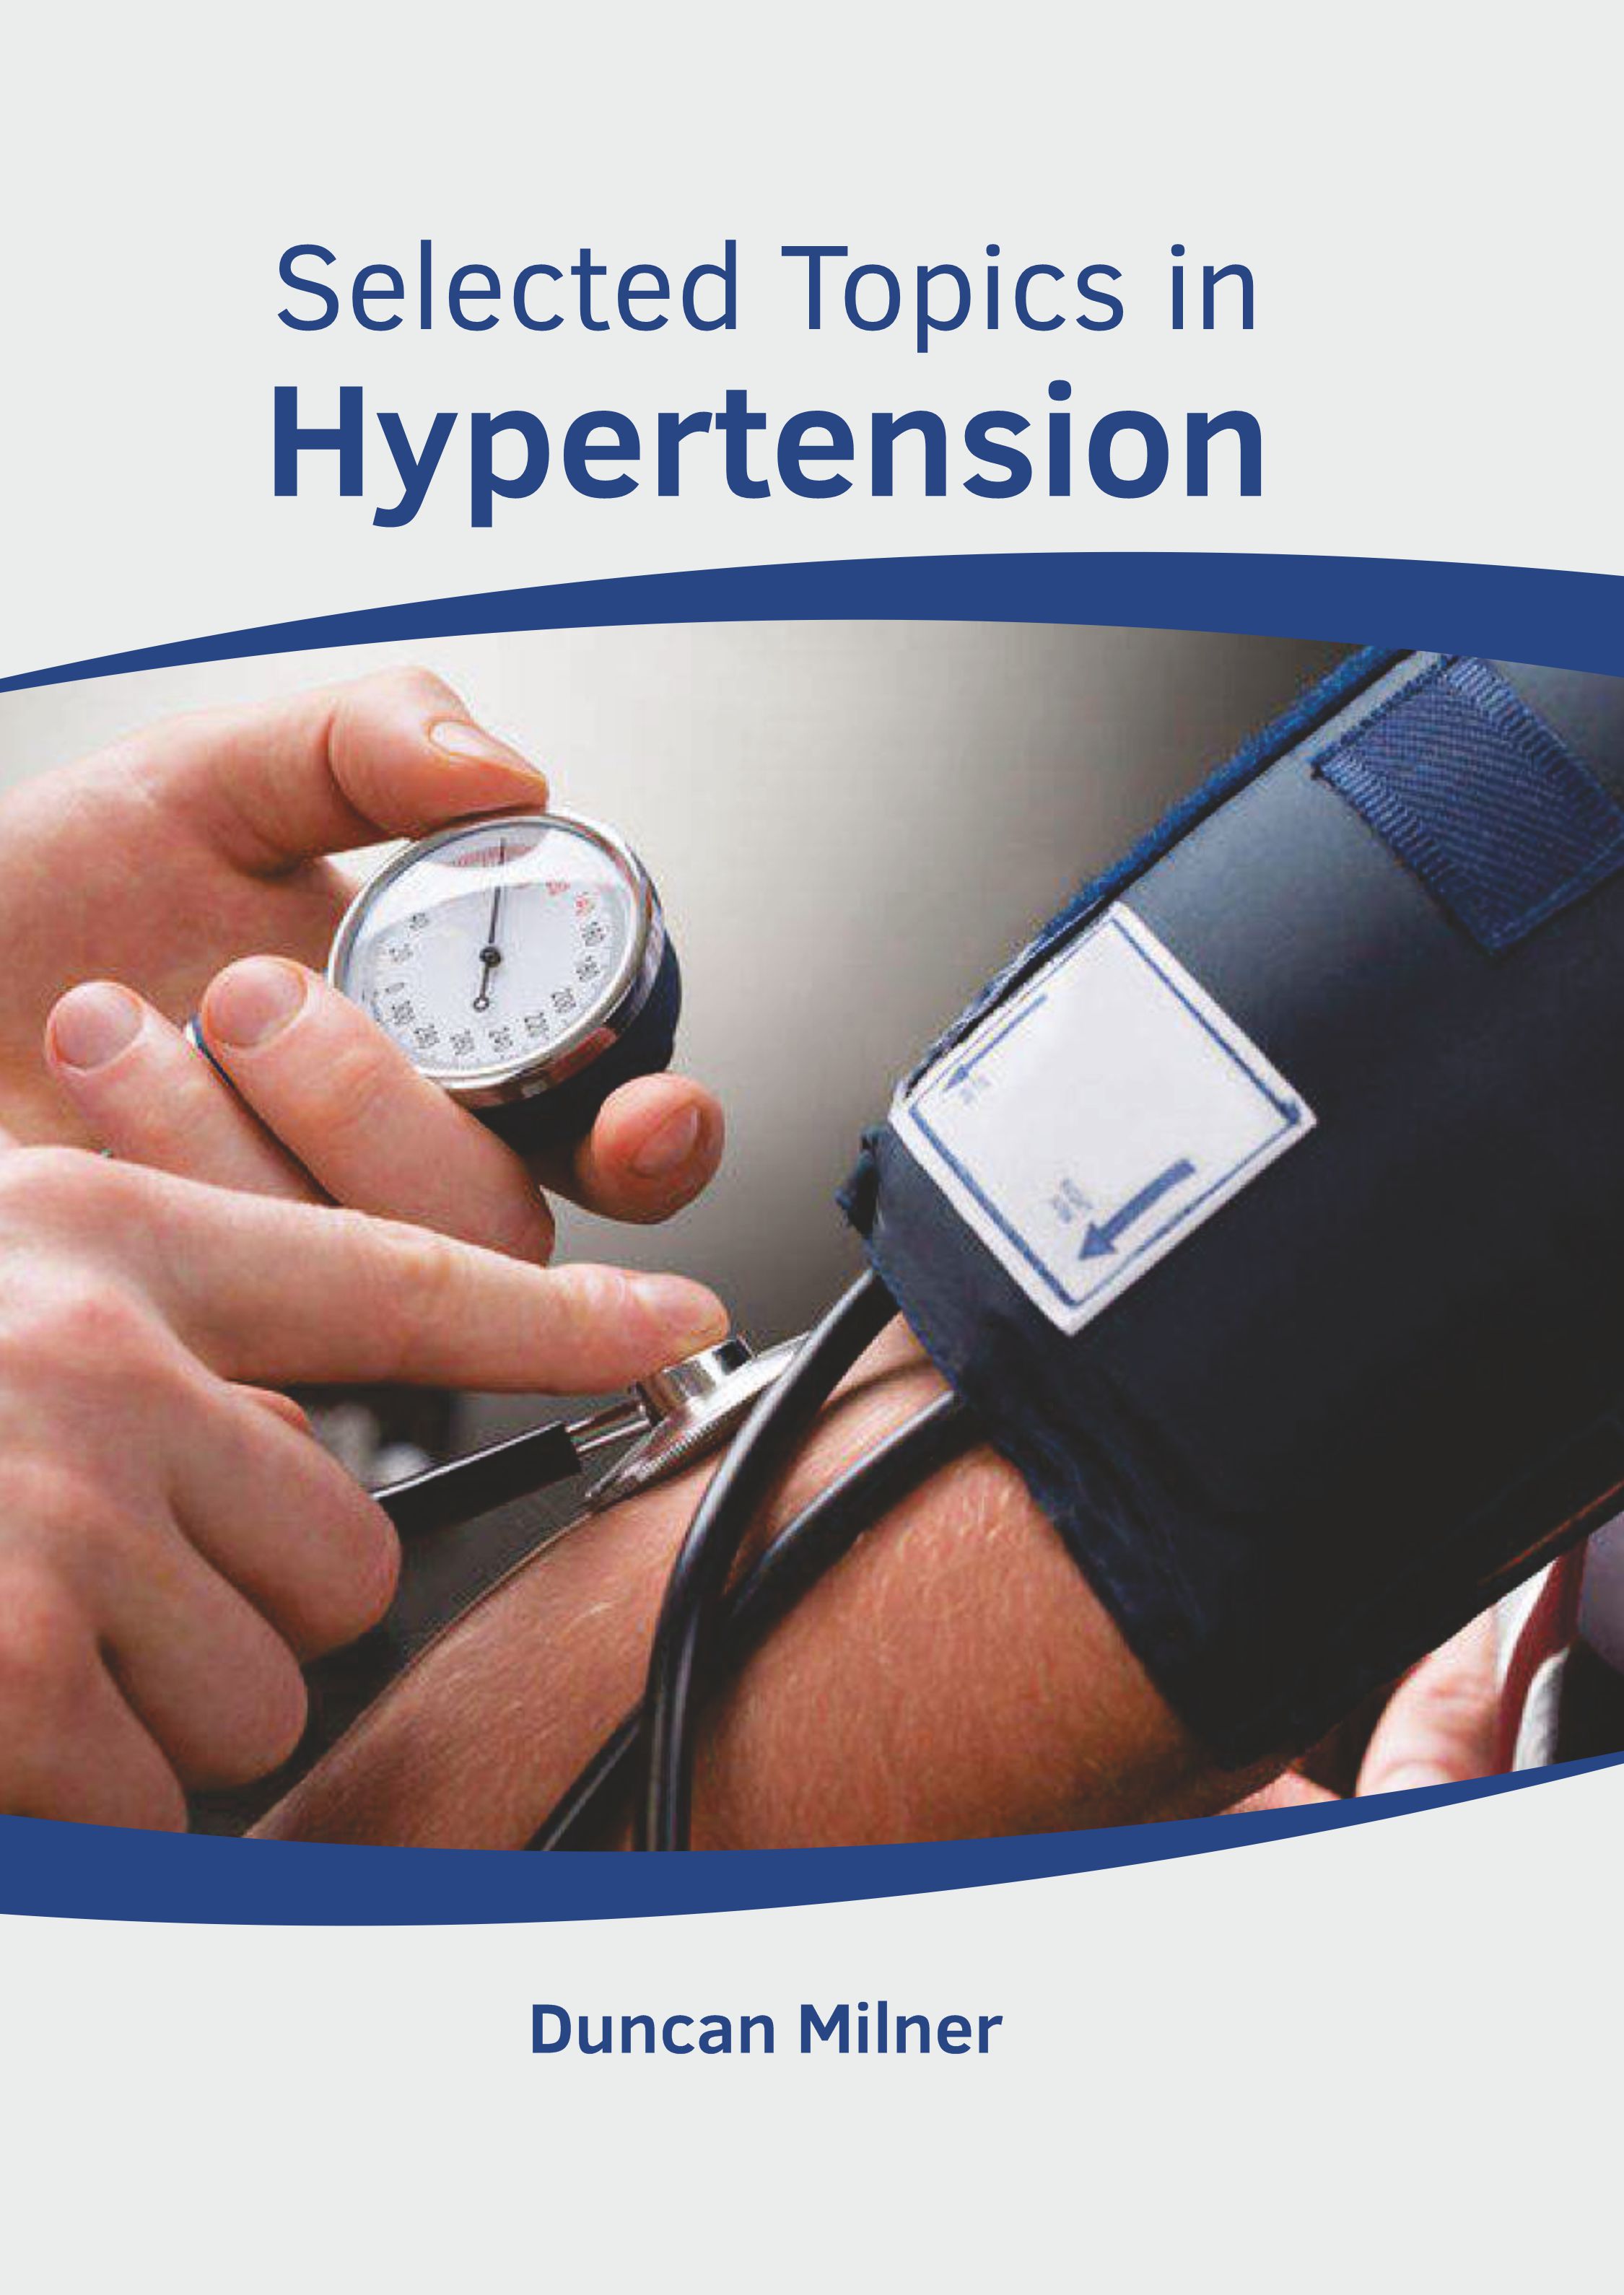 SELECTED TOPICS IN HYPERTENSION